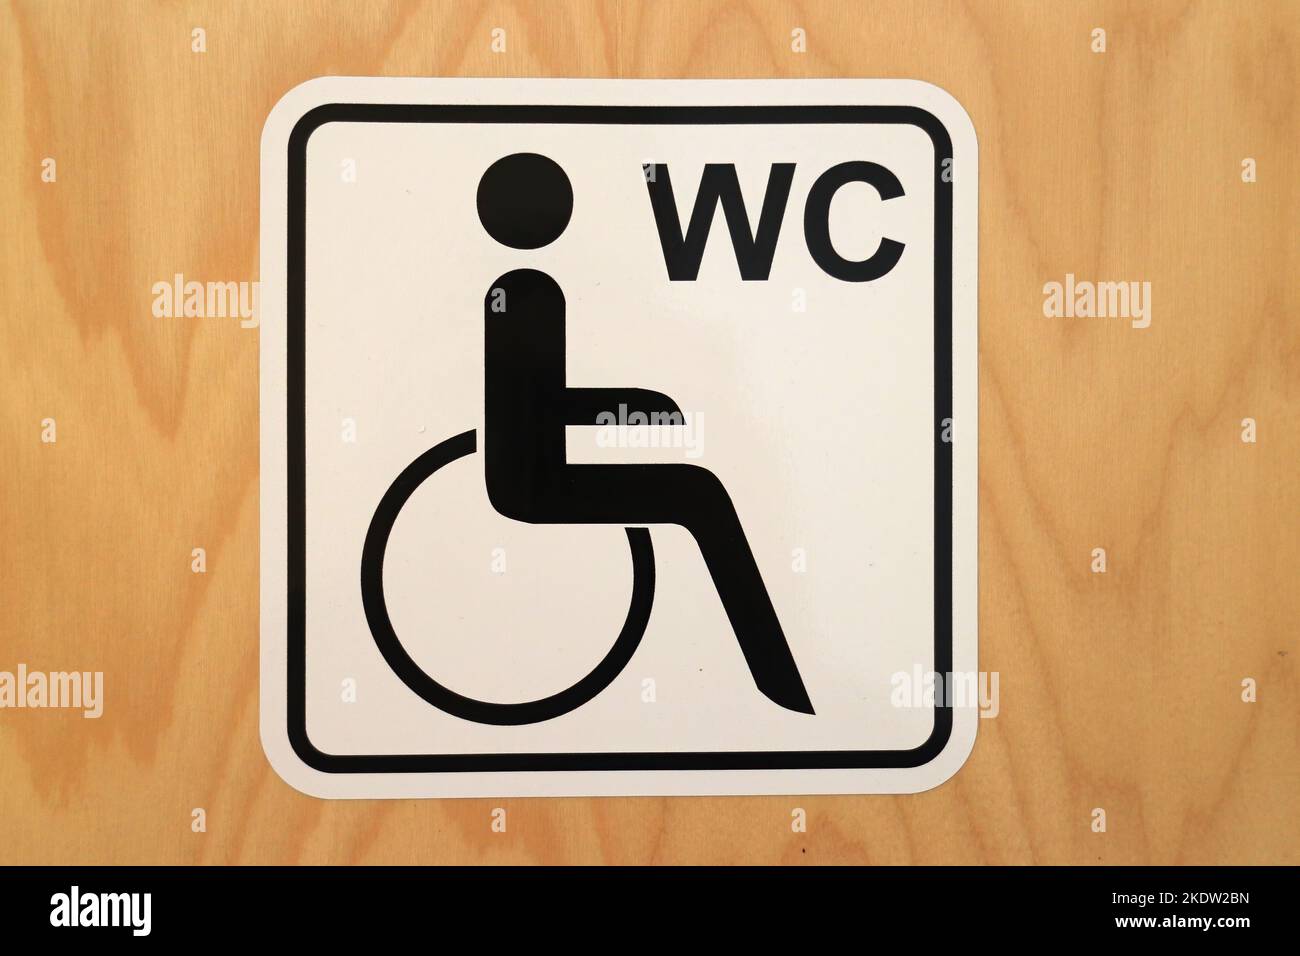 Sign with an icon for a restroom for handicapped people Stock Photo